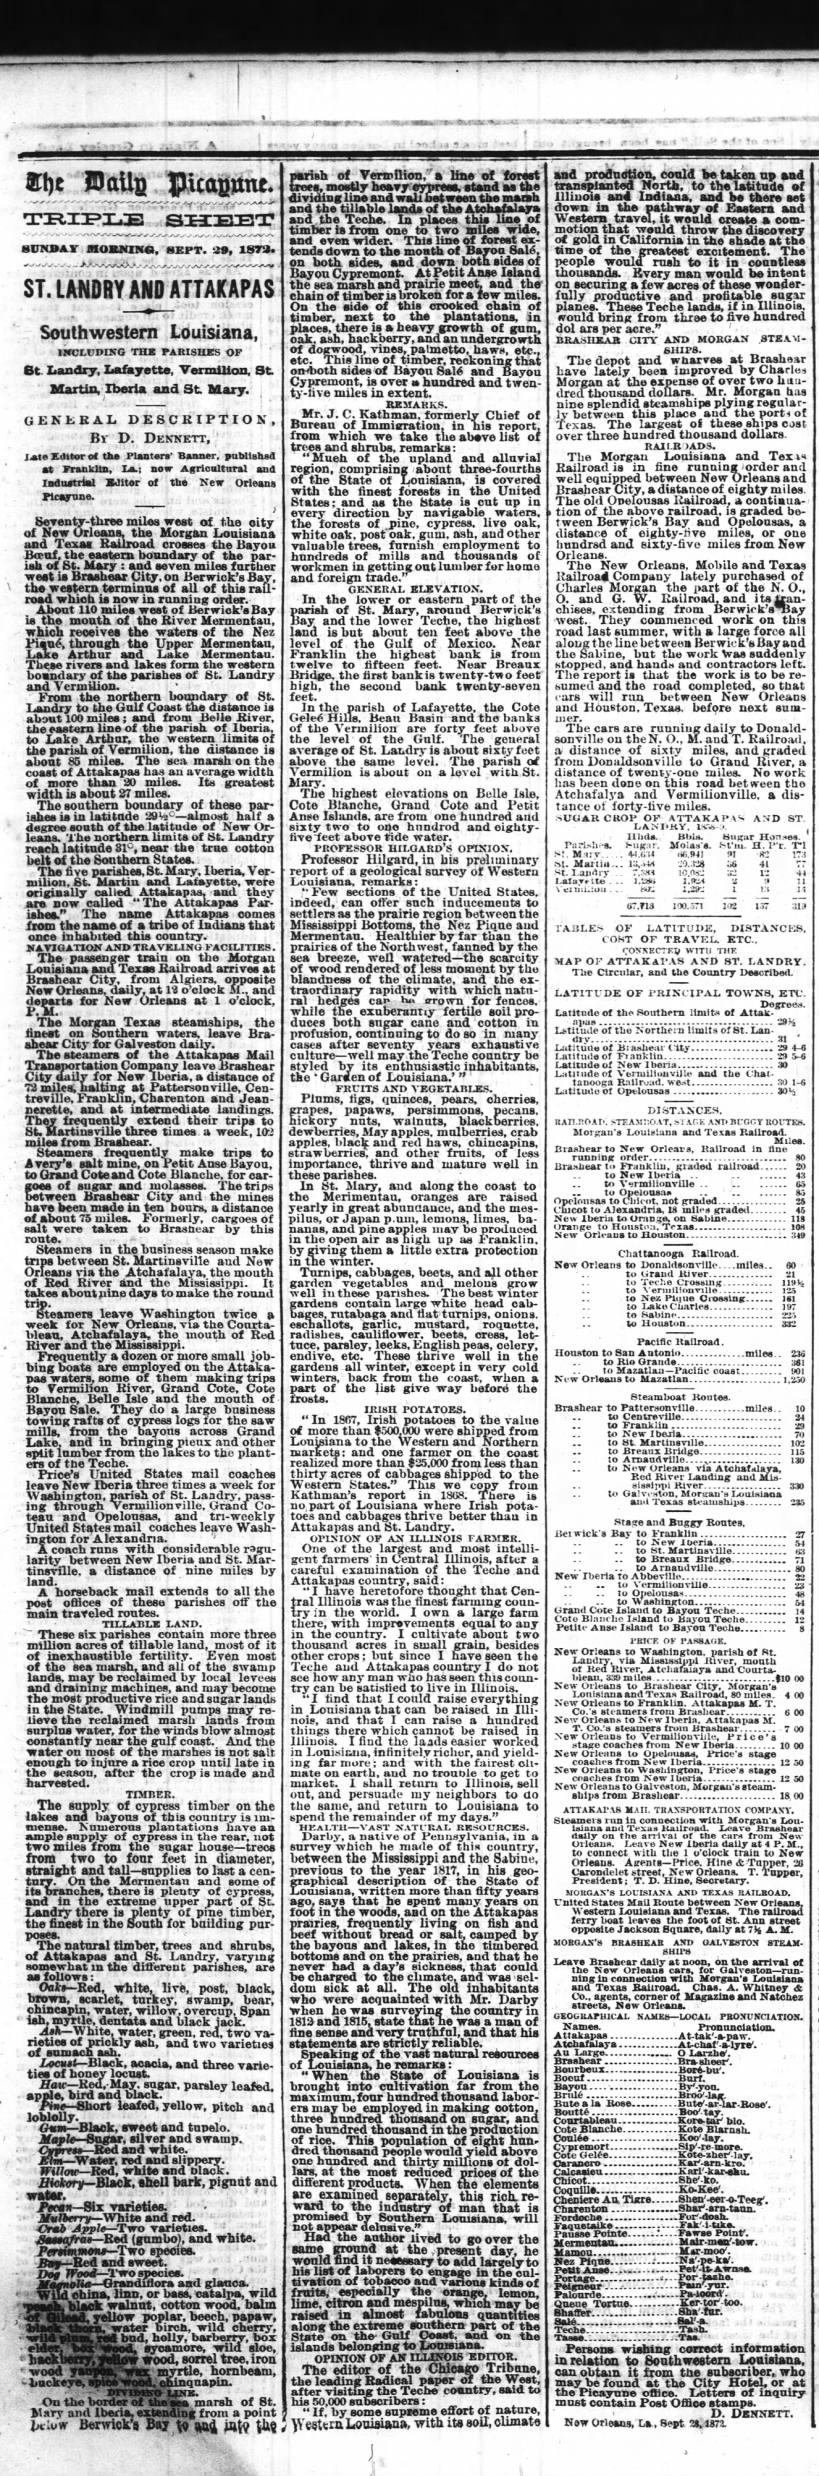 The Times-Picayune (New Orleans) Sept. 29, 1872